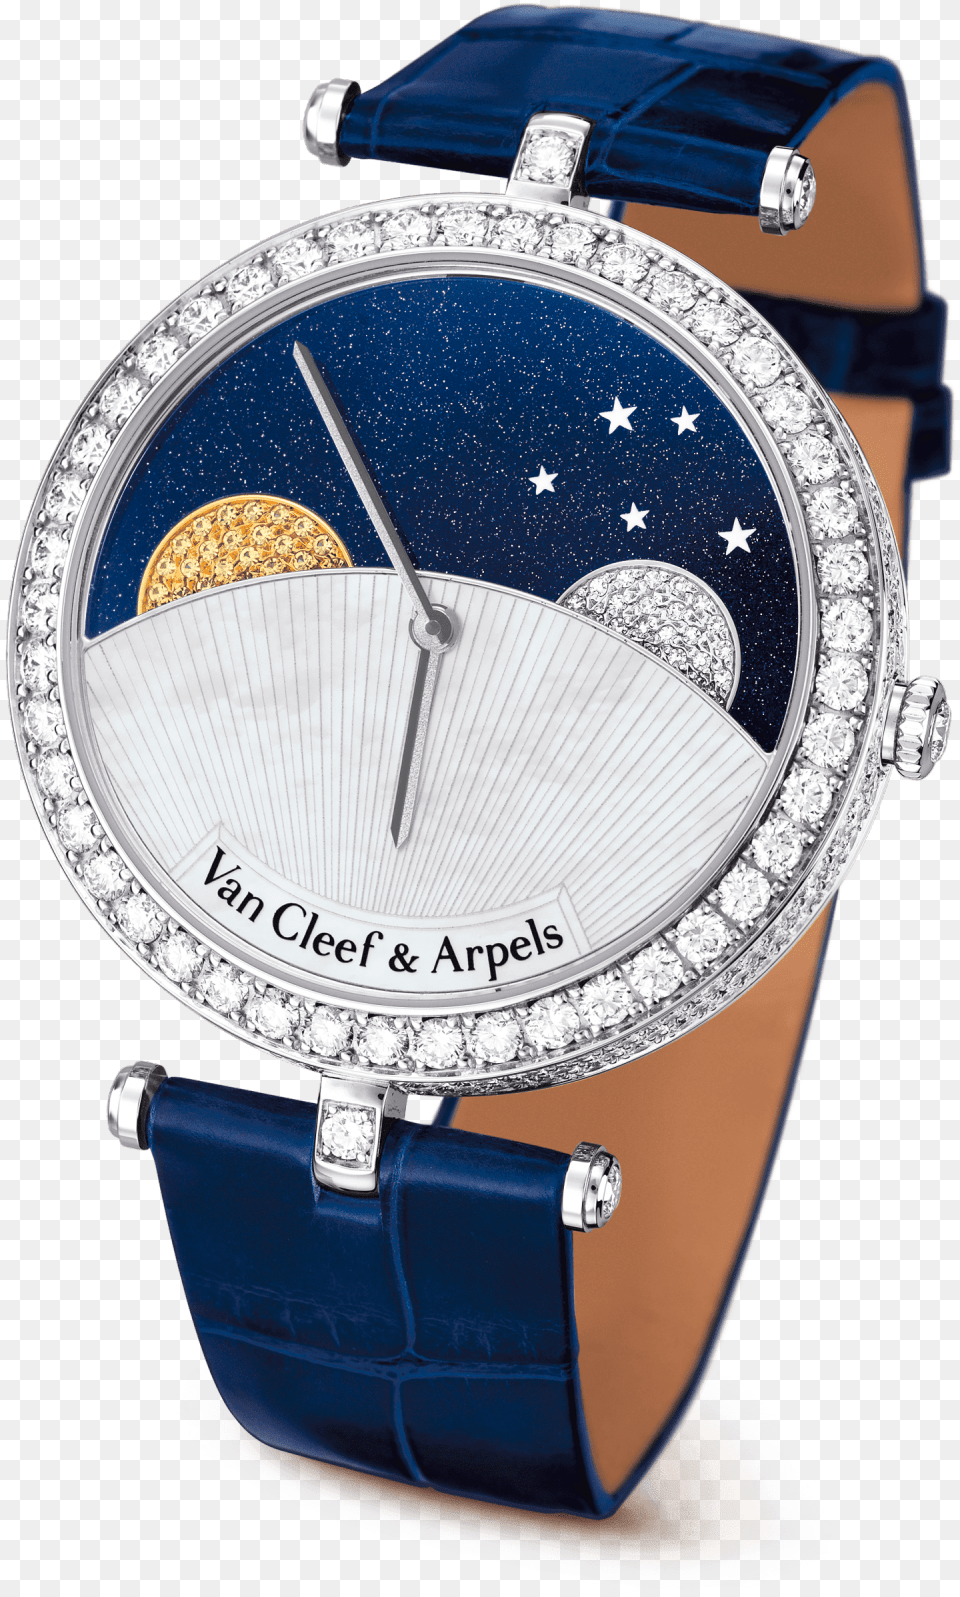 Lady Arpels Day And Night Watchshiny Alligator Square Van Cleef Amp Arpels Orologi, Arm, Body Part, Person, Wristwatch Free Transparent Png